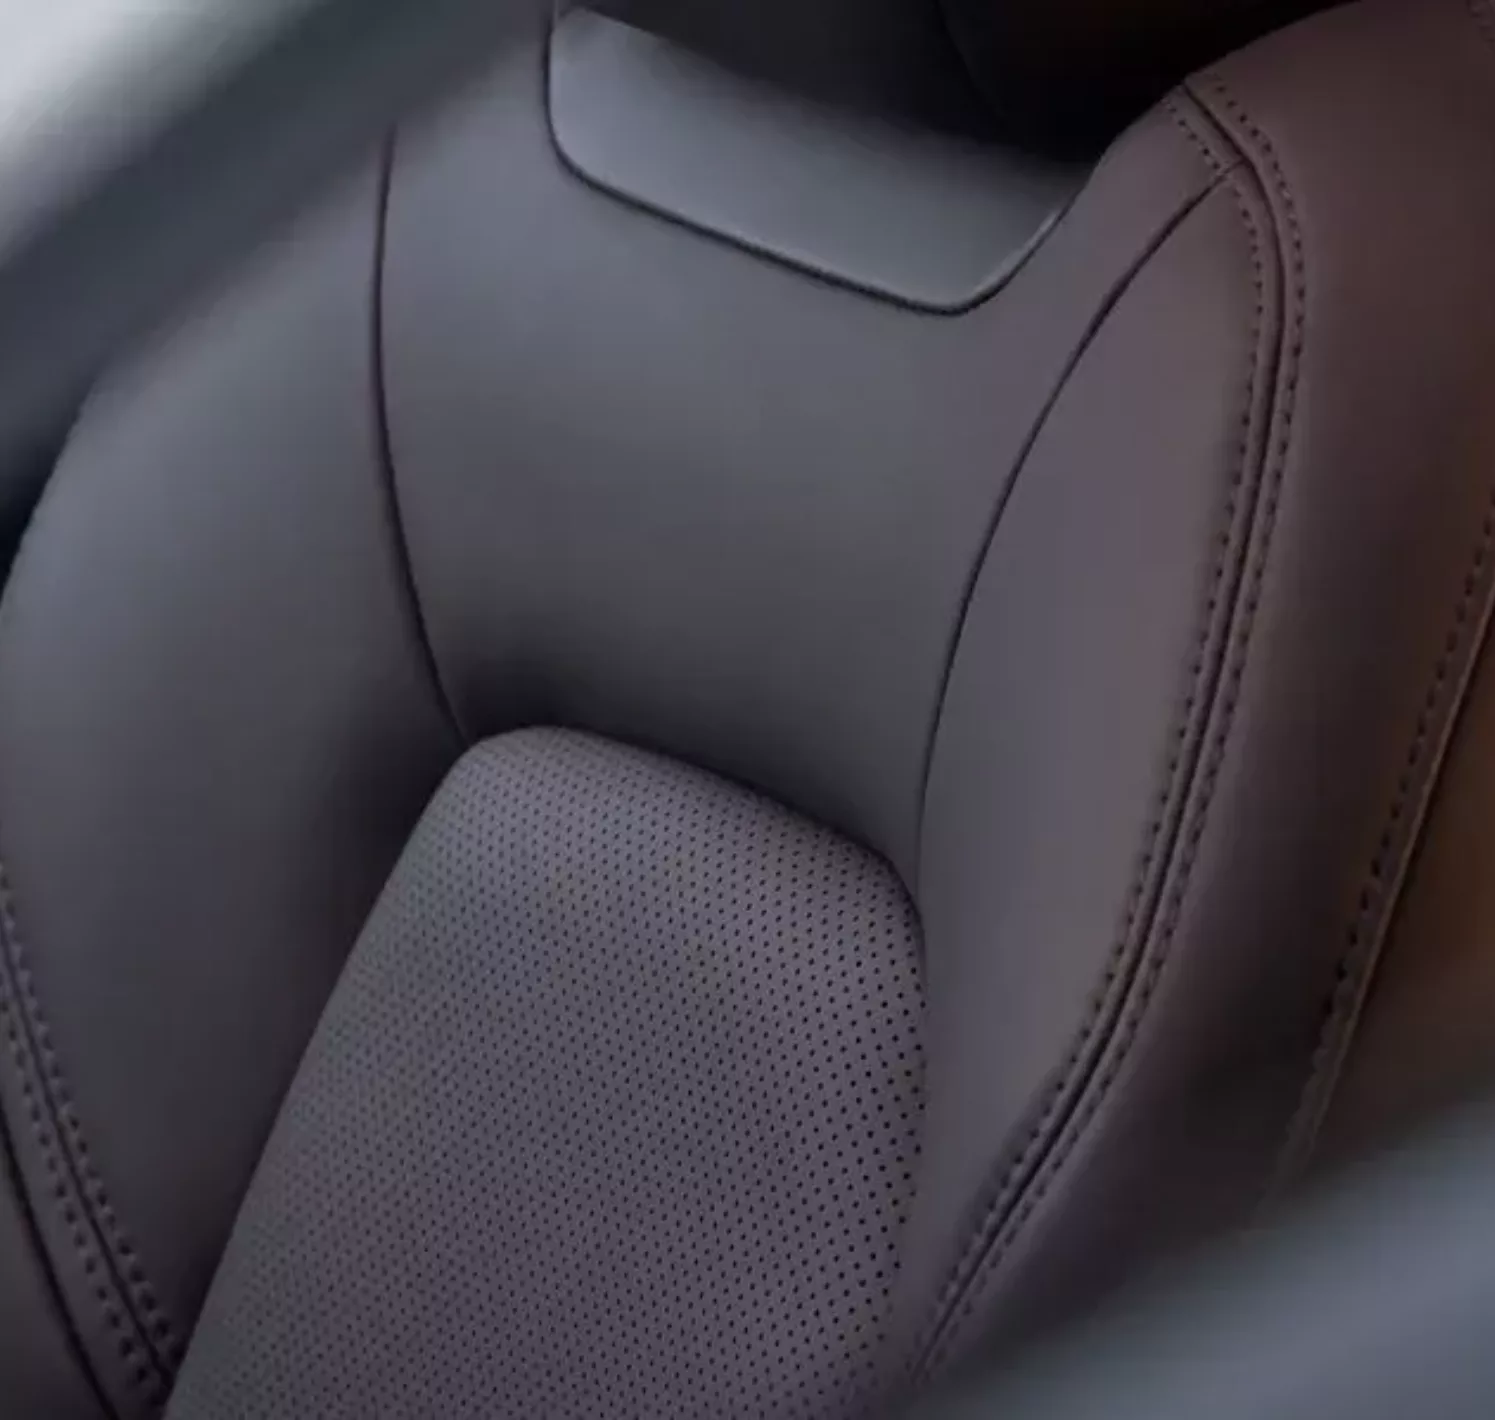 https://autofilter.sk/assets/images/cx-5/gallery/2022-mazda-cx-5-nappa-leather-upholstery-1631627142.webp - obrazok